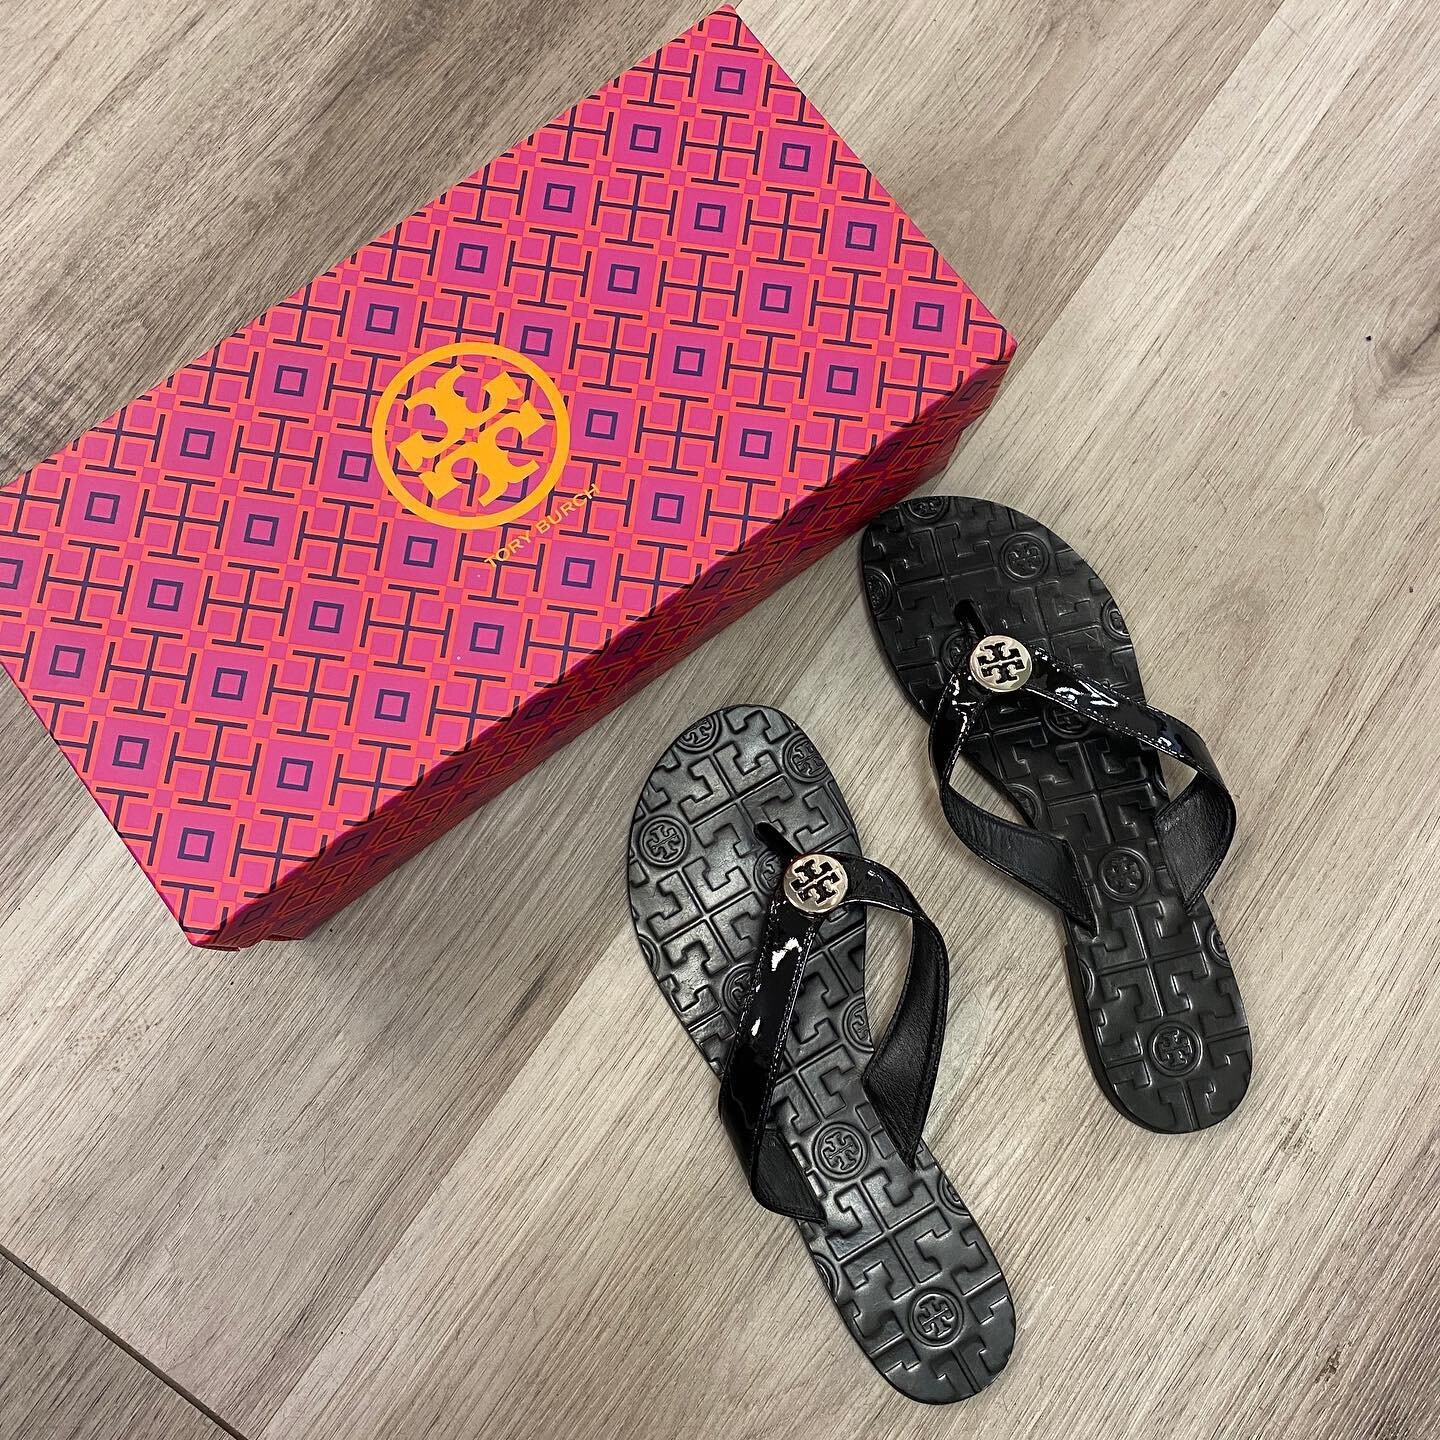 SOLD‼️Black Patent #toryburch Logo Flip Flops Size: 7 Retails at $129.99 Mint Price: $39.99

Don&rsquo;t forget we ship and offer curbside pickup! ♻️ Call 📞 703-836-6468 to buy today! ✅ Authenticity is guaranteed with a money back promise ✅ *Consign